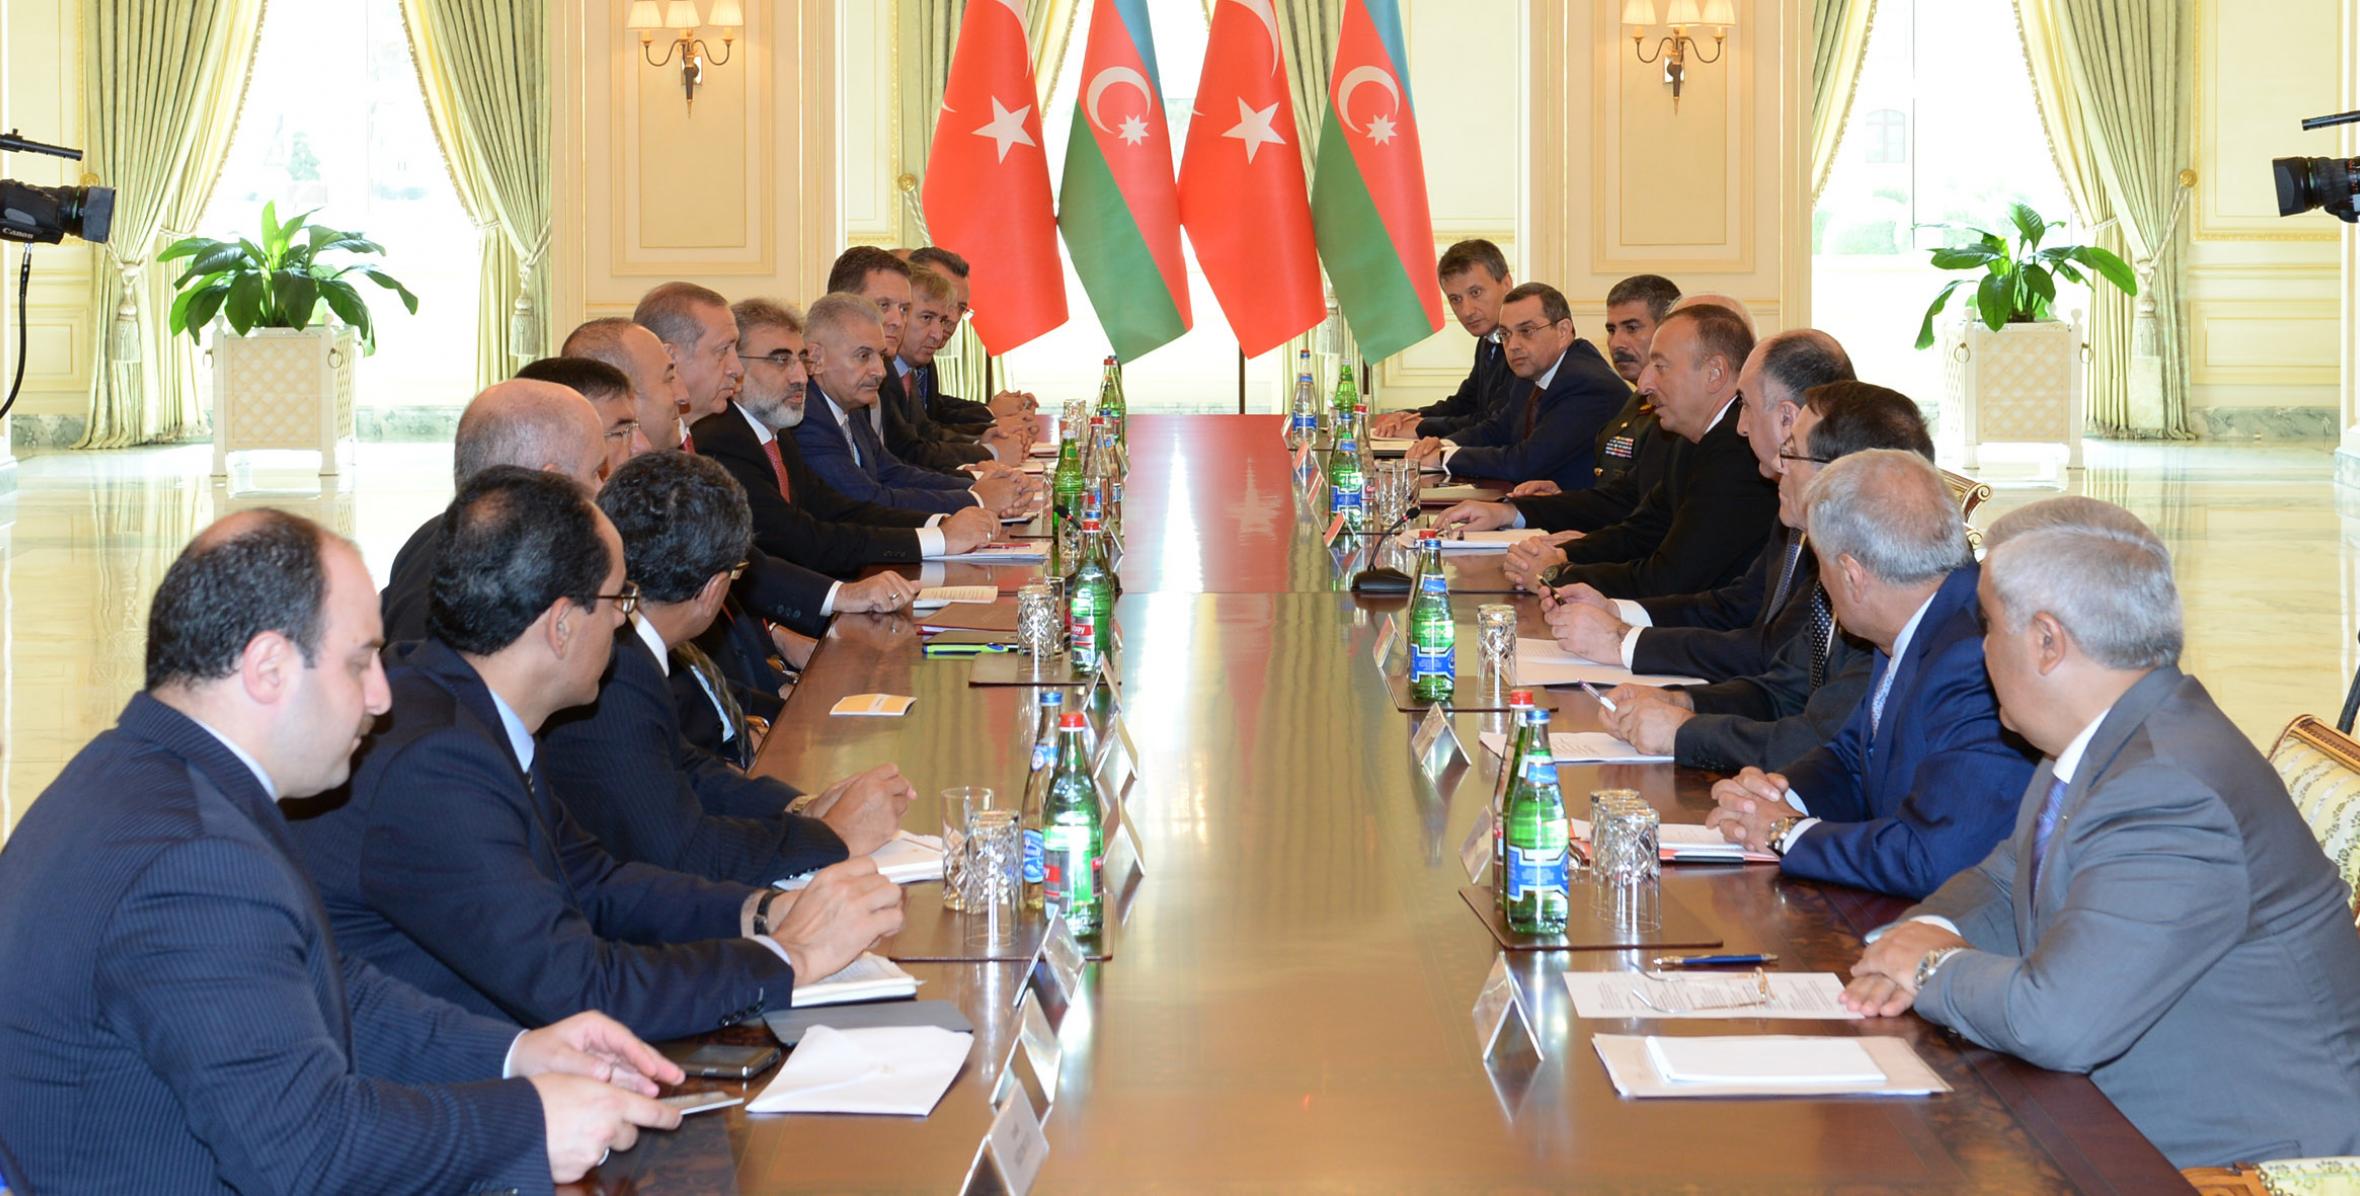 Presidents of Azerbaijan and Turkey held a meeting in an expanded format